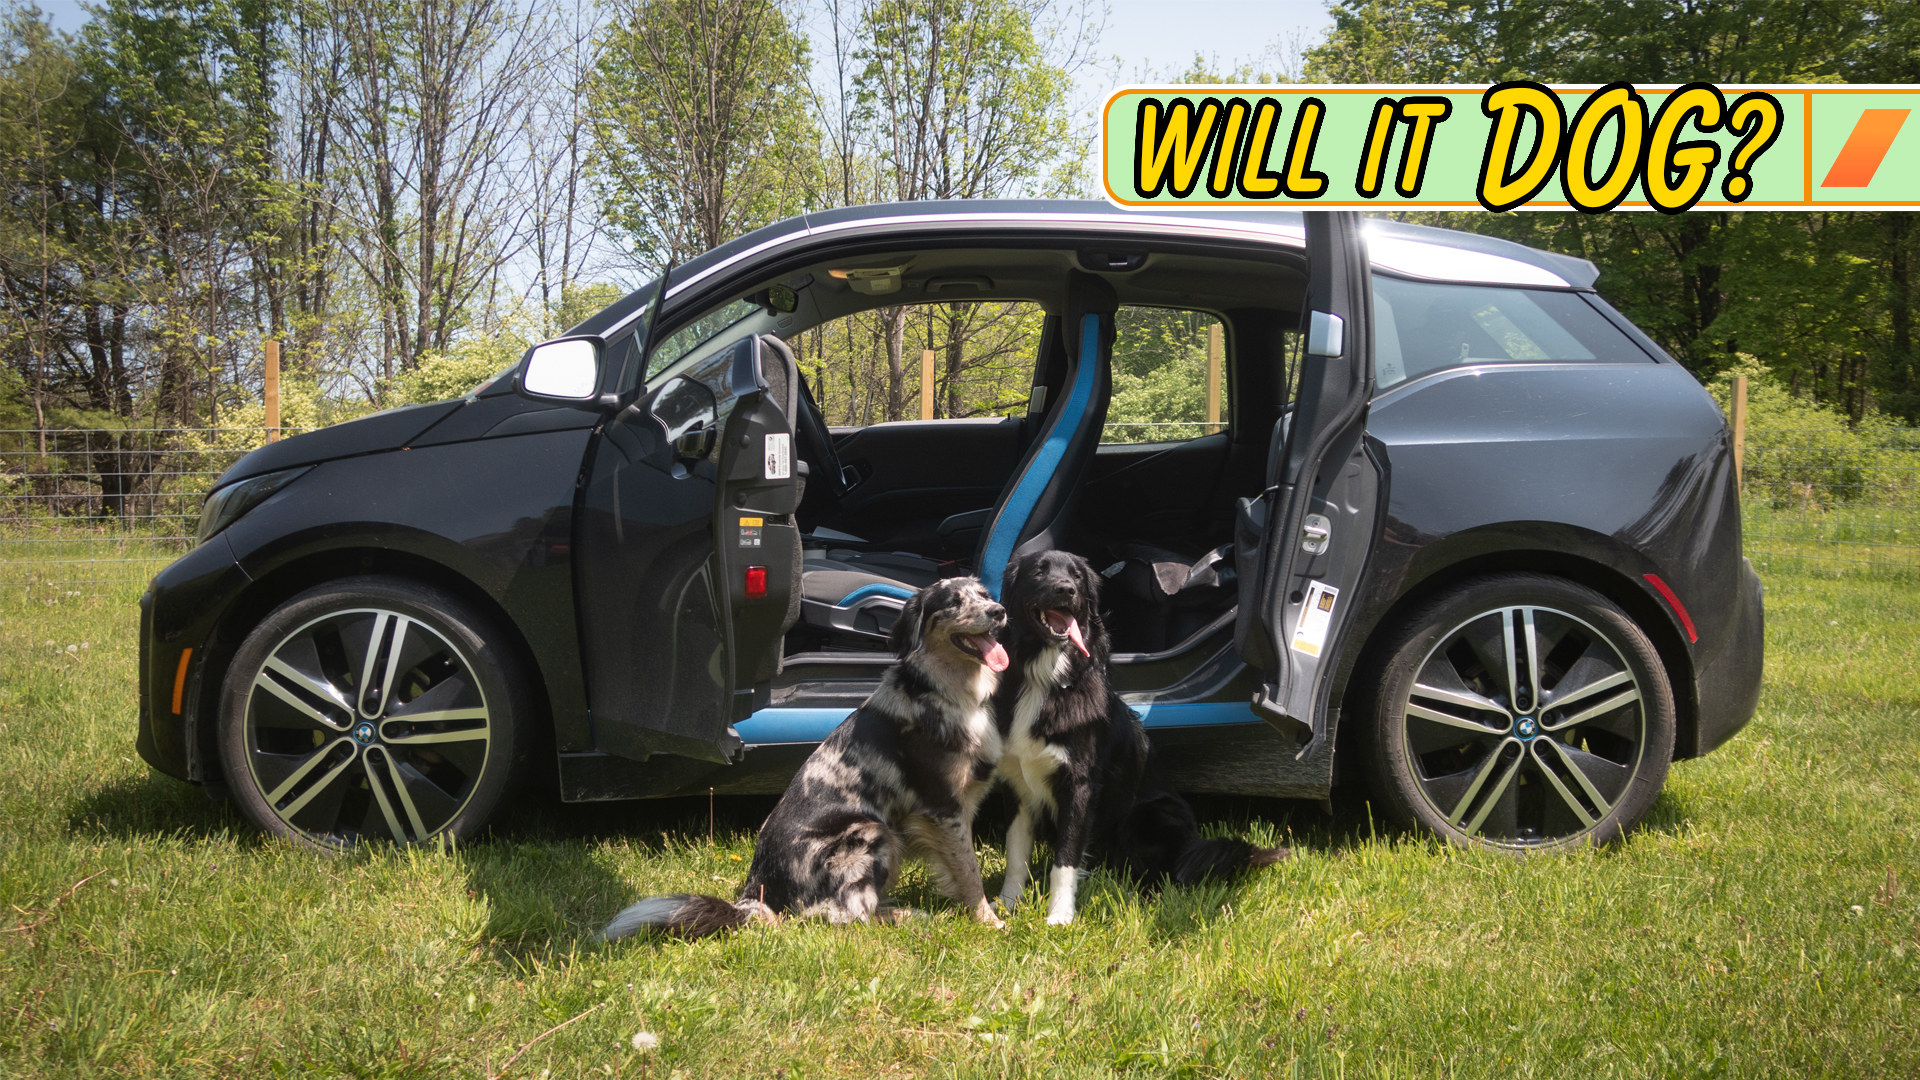 https://www.thedrive.com/uploads/2023/05/18/BMW-i3-Review-For-Dog-Owners.jpg?auto=webp&crop=16%3A9&auto=webp&optimize=high&quality=70&width=1440